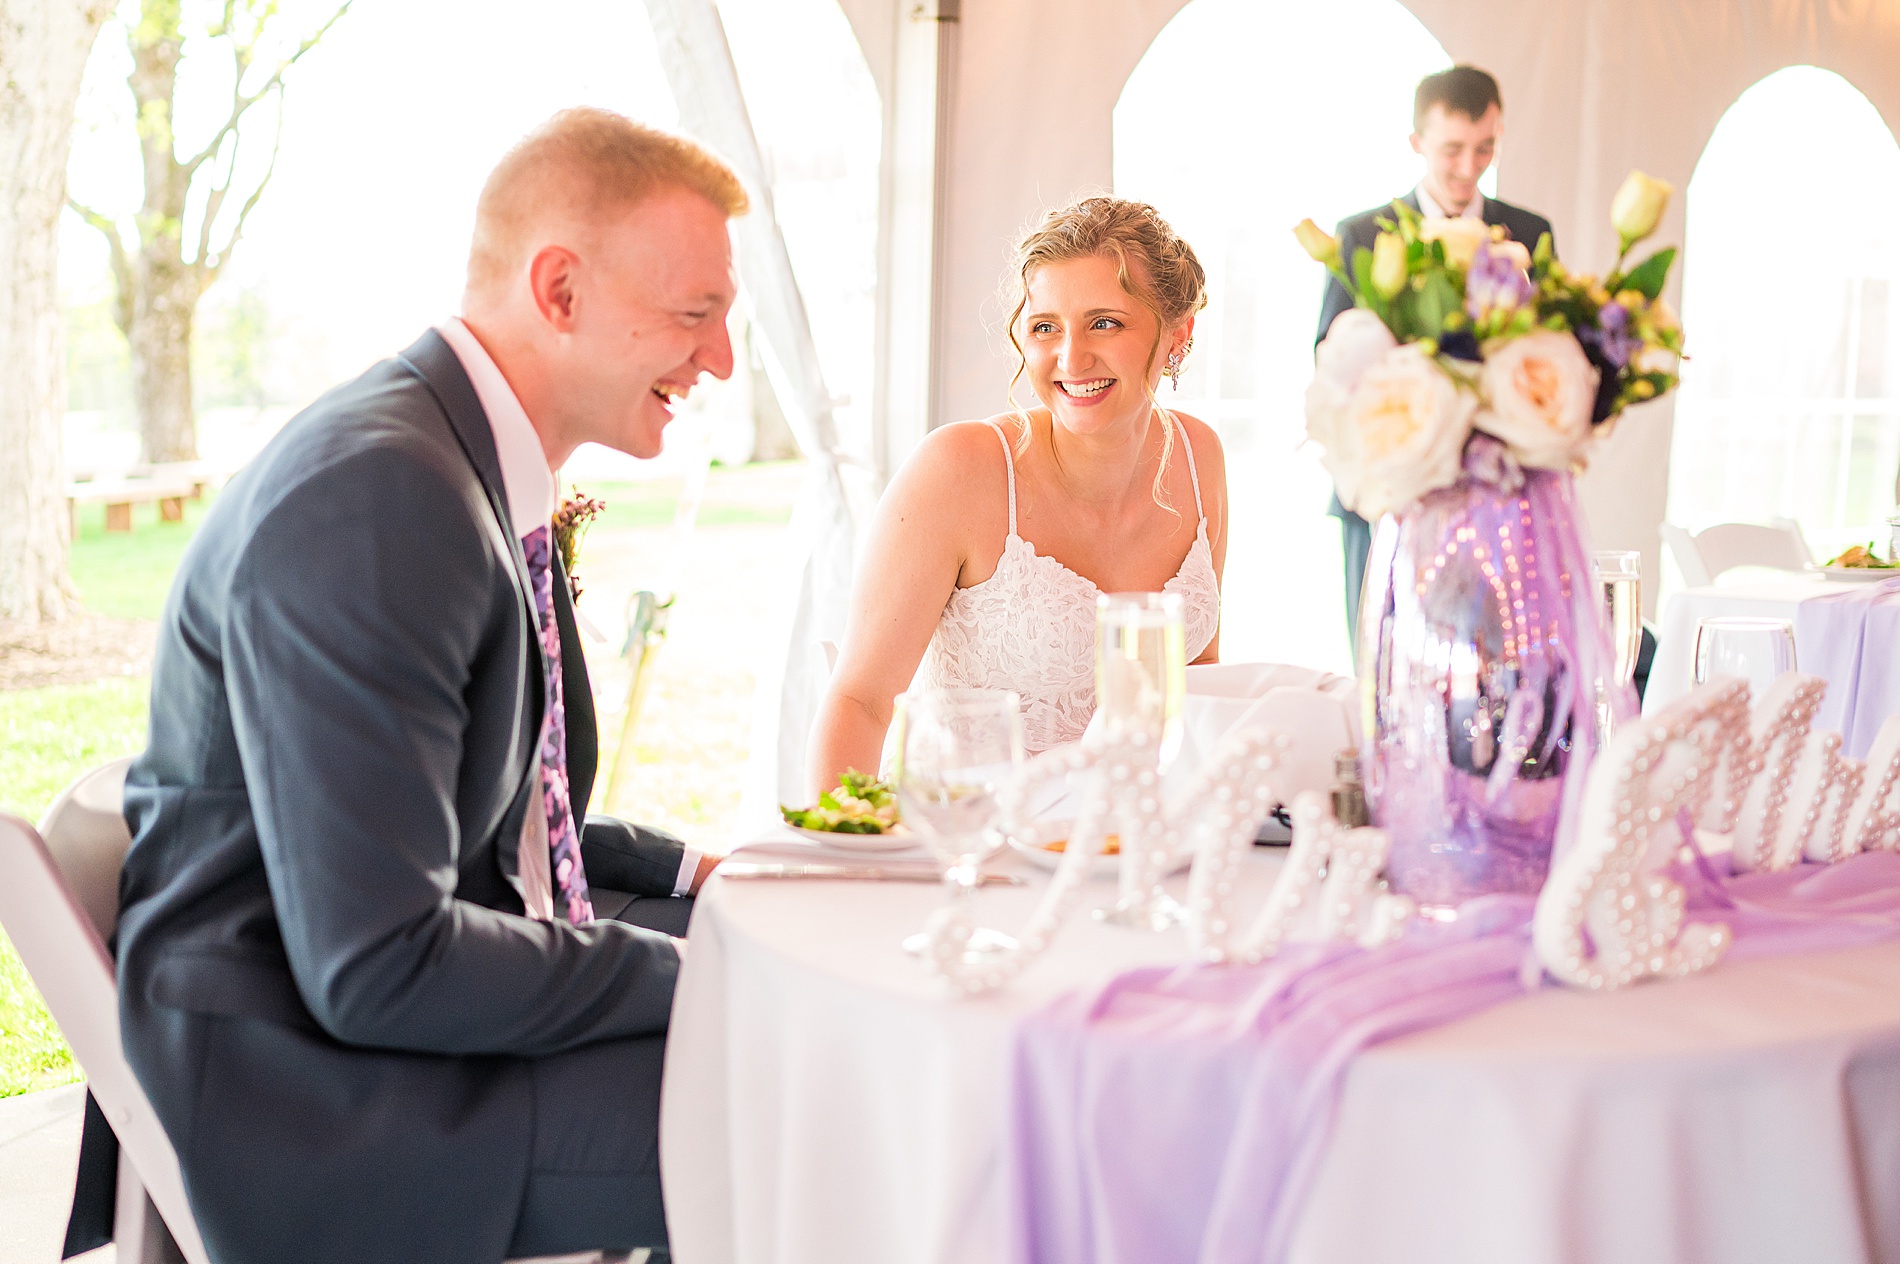 candid photo of newlyweds laughing together at head table